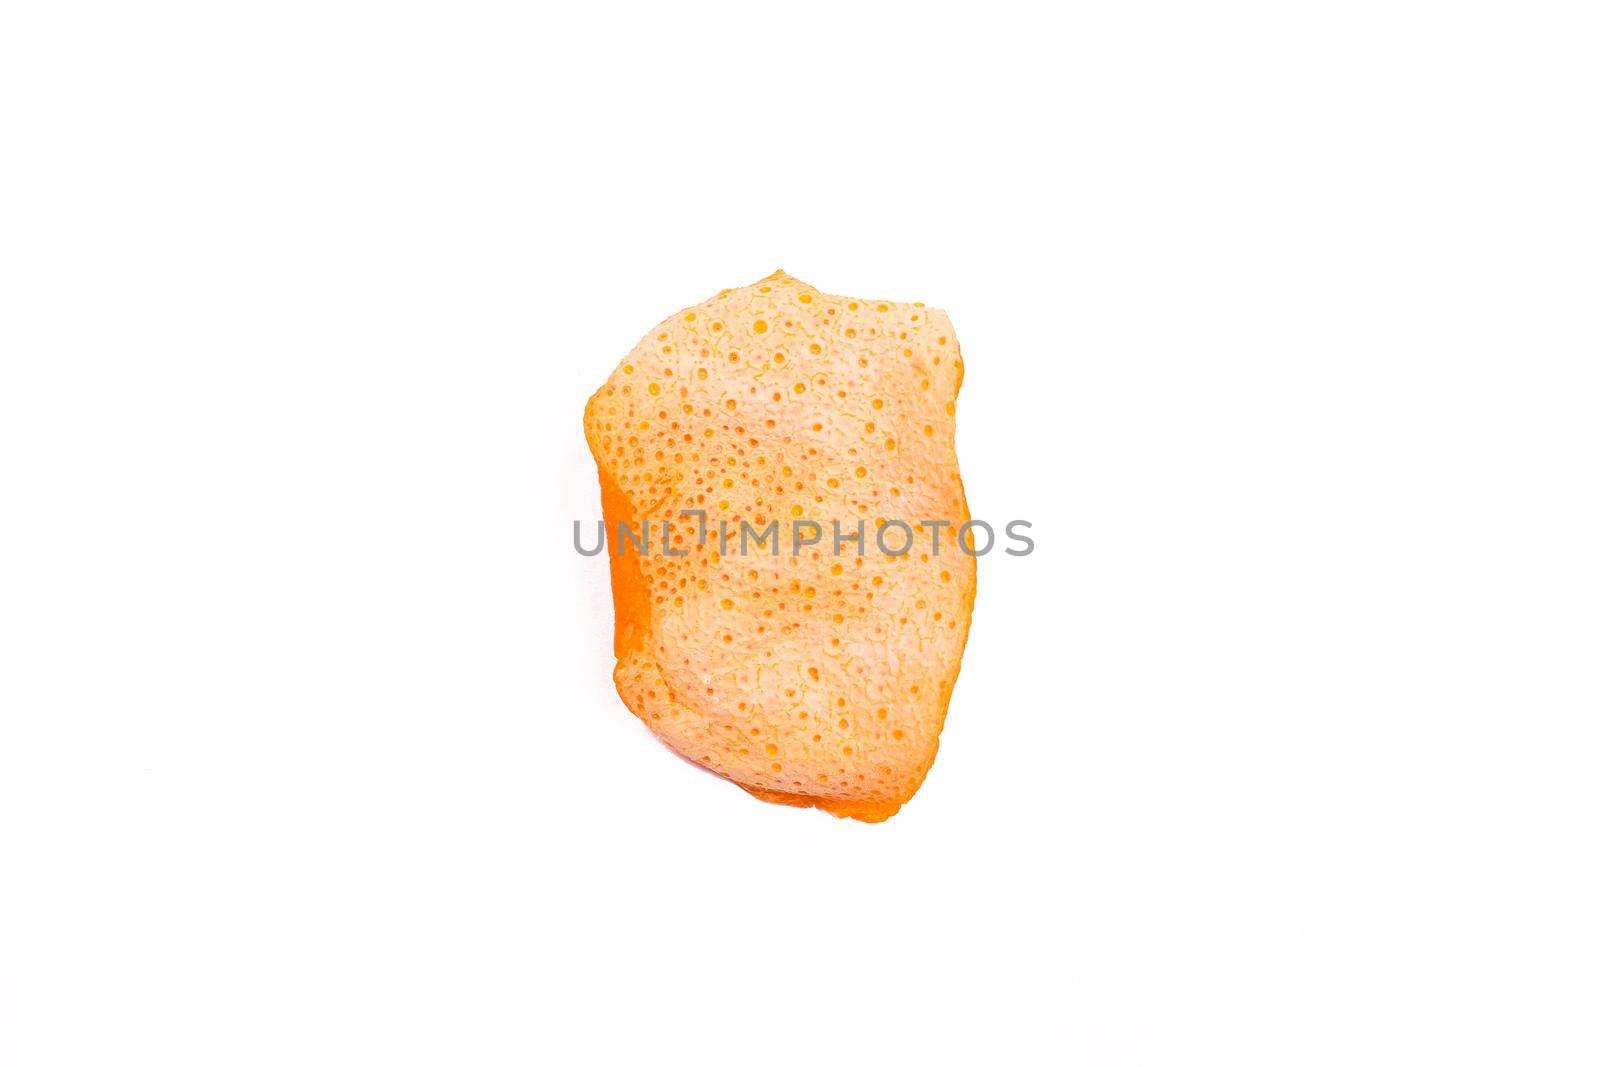 Dried orange peels isolated on a white background.